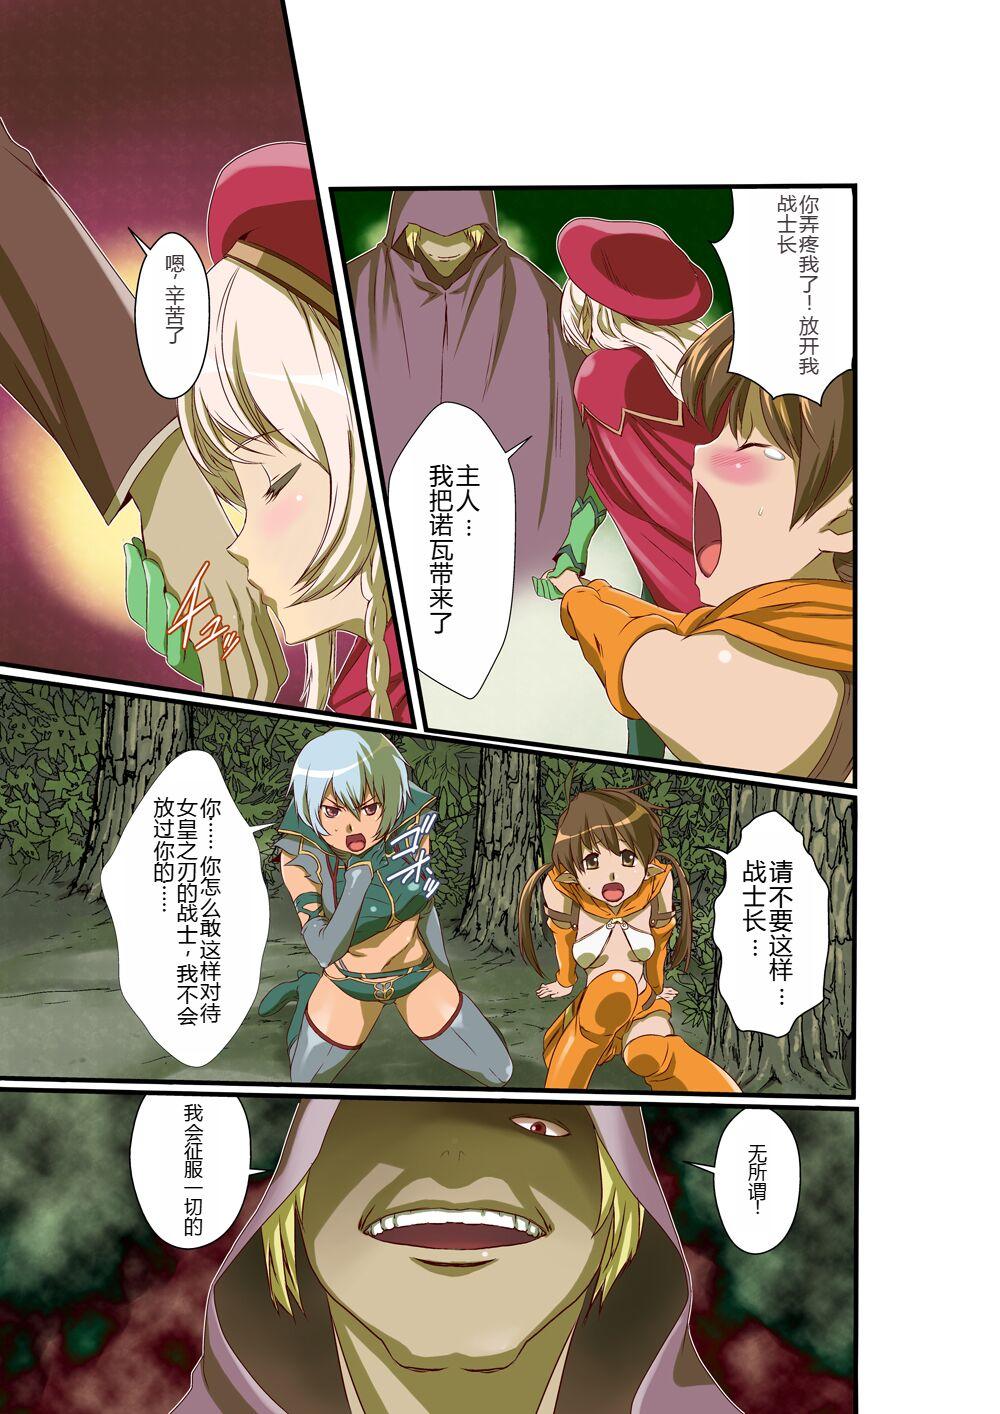 Ftv Girls Queen's *lade Mind-control Manga - Queens blade Cum In Mouth - Page 13